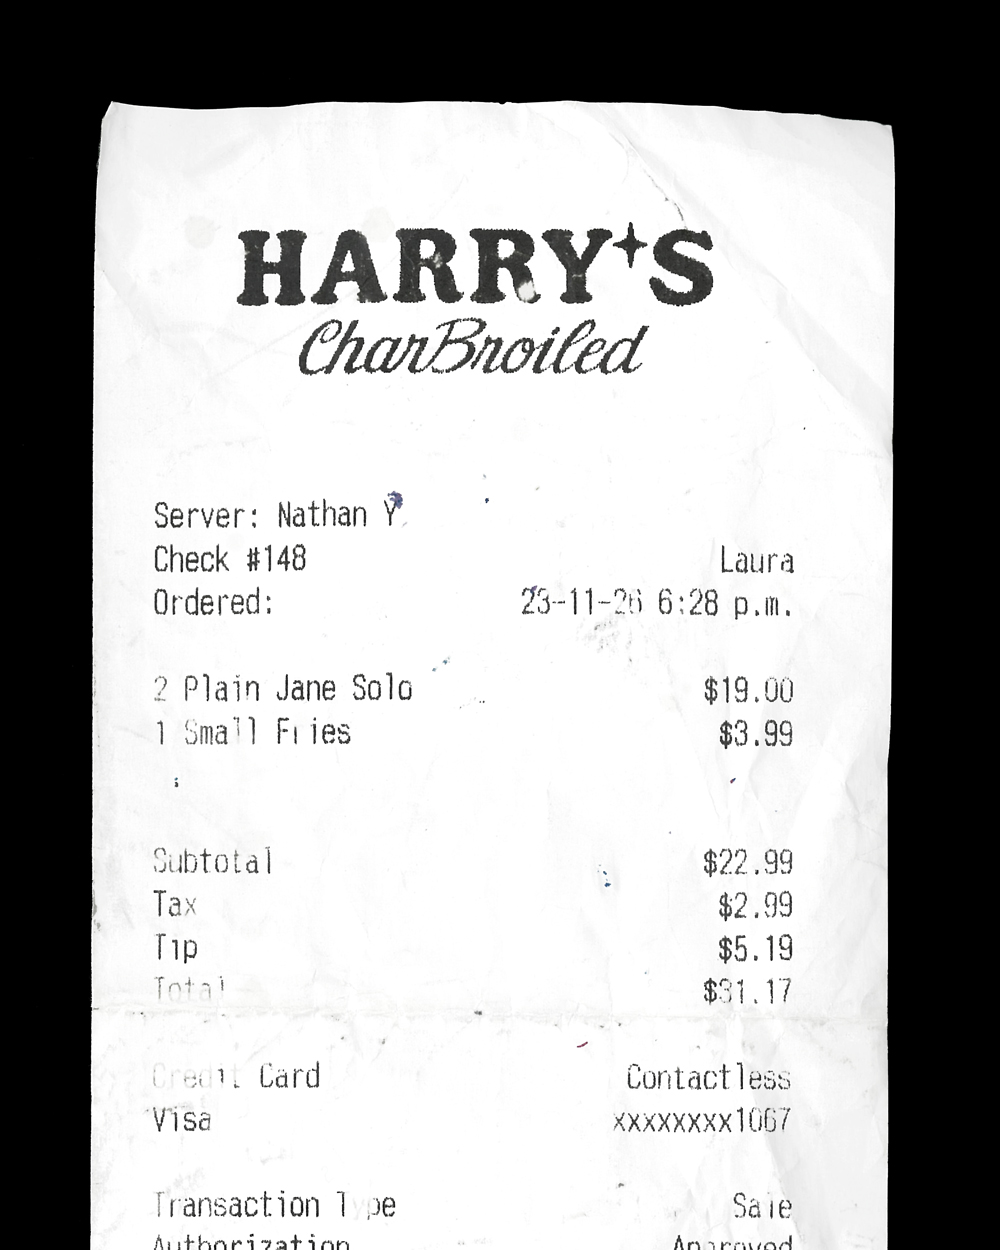 A scan of a harry's receipt showcasing the wordmark